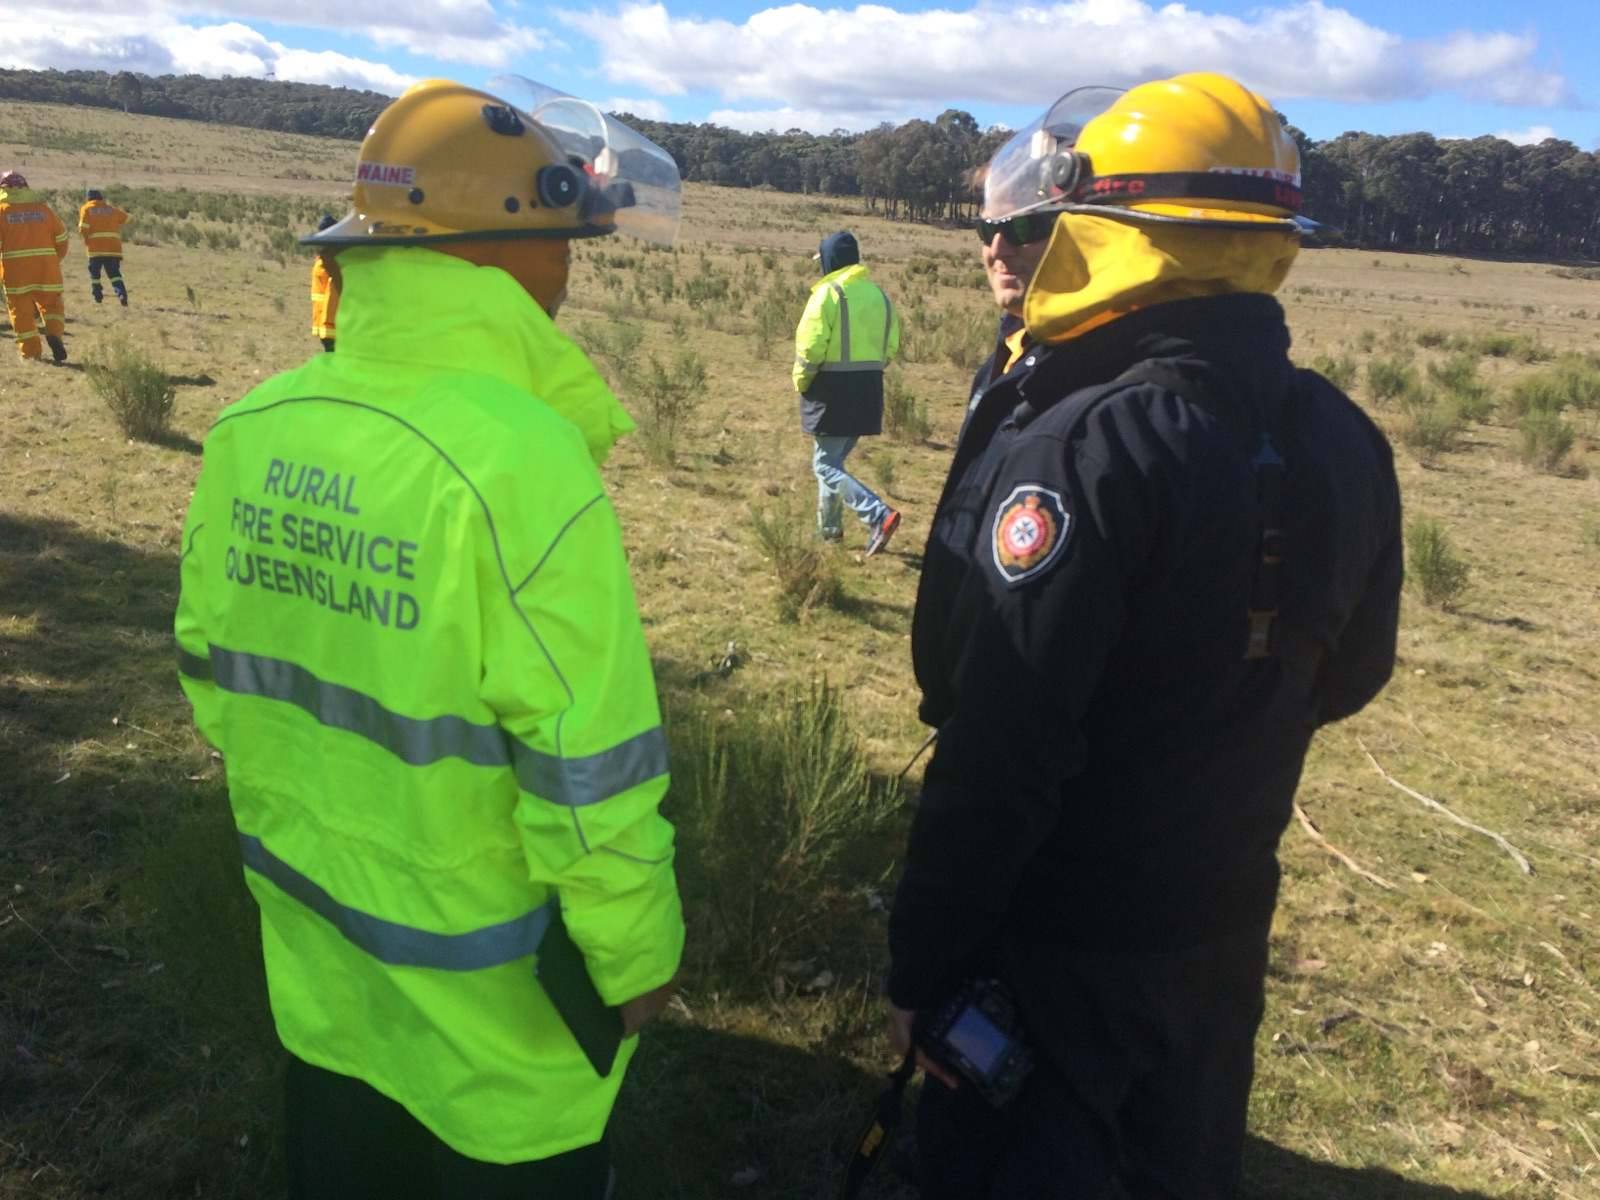 ACE Course conducted near Orange NSW Rural Fire Service